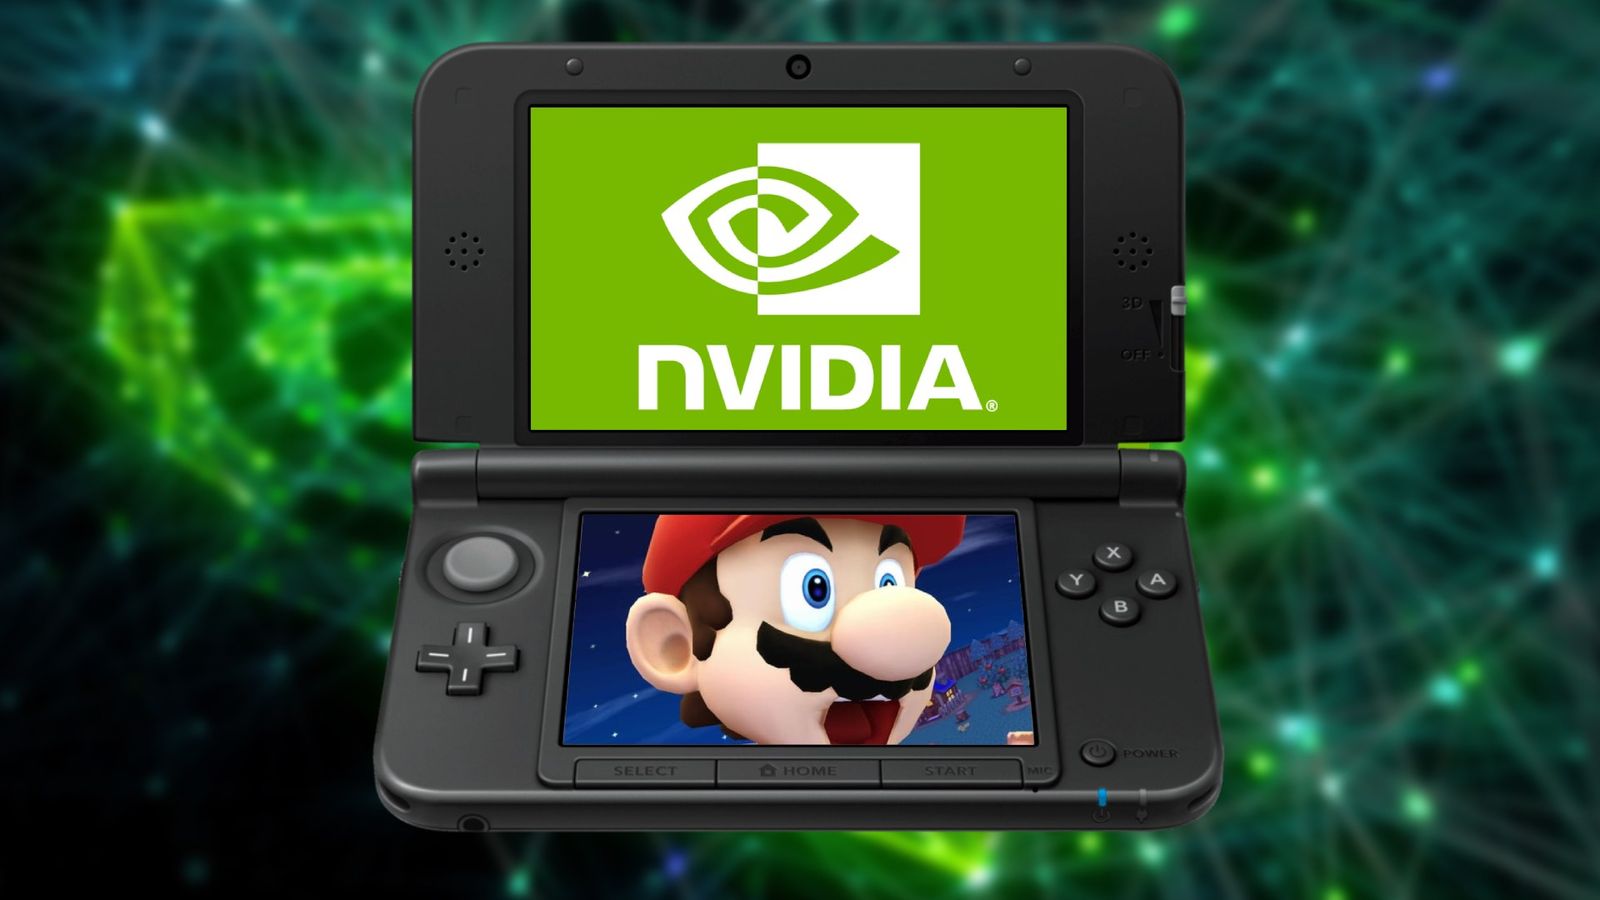 The Nintendo 3DS handheld with an Nvidia Logo and a Shocked Mario on the bottom screen  